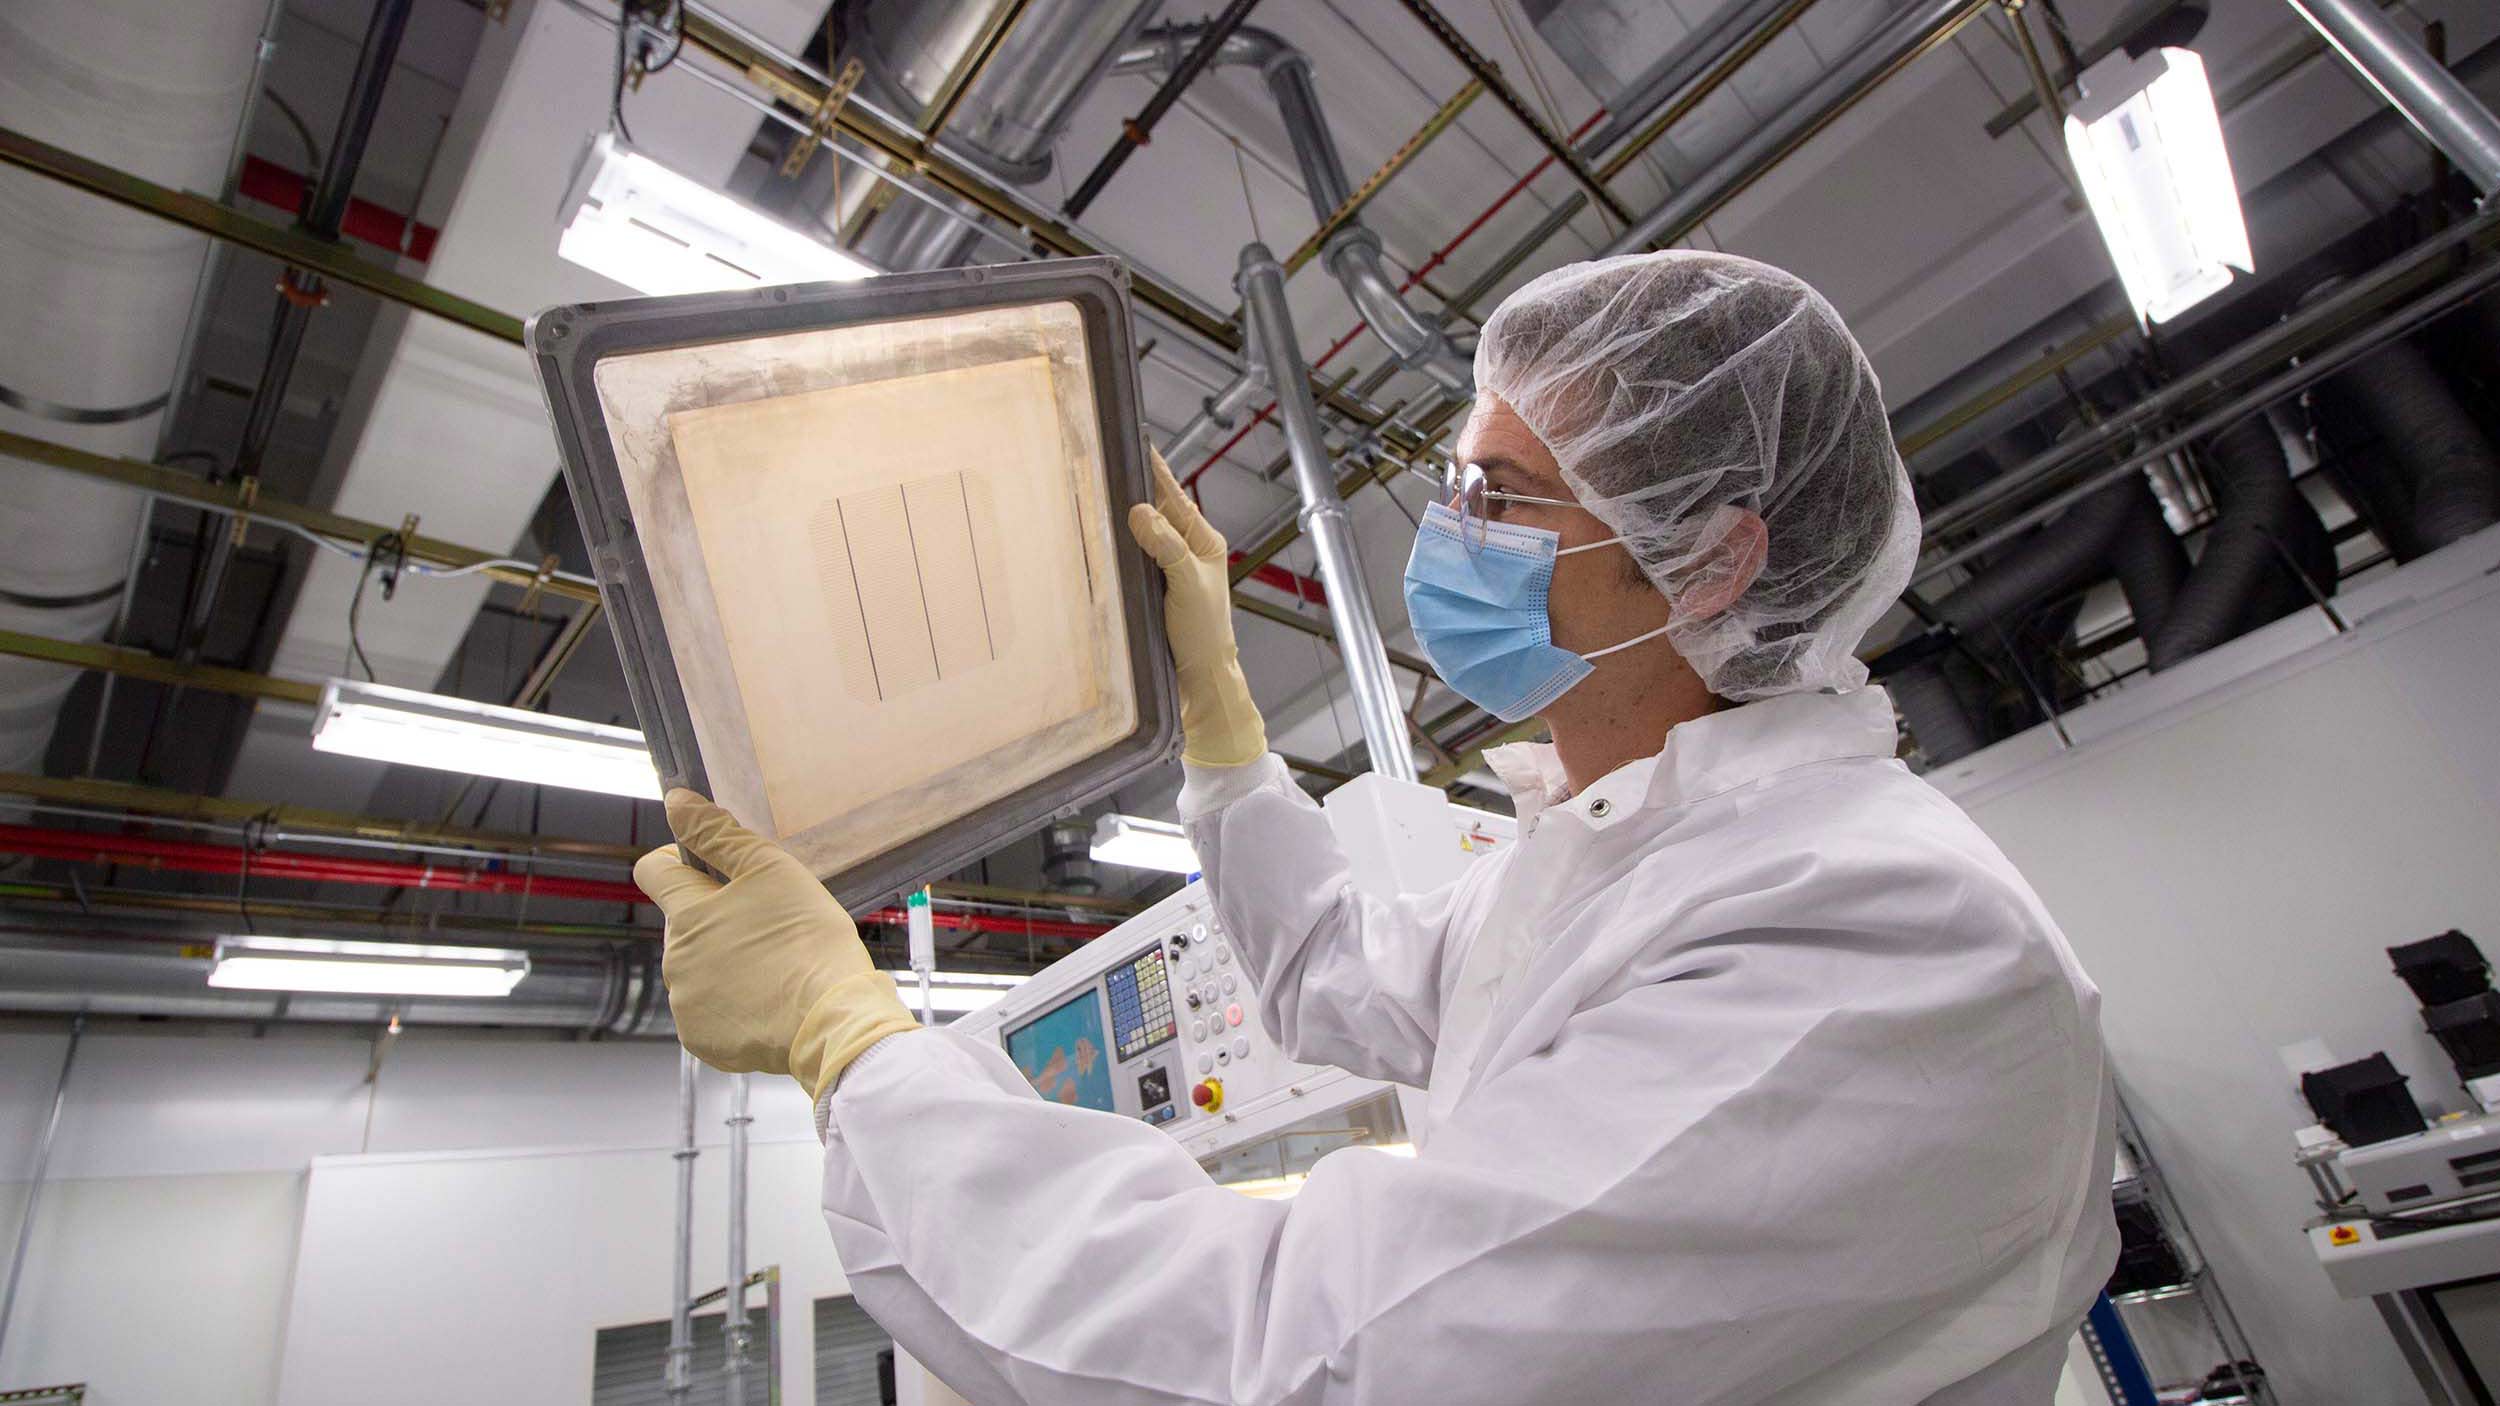 Zak Holman holding up a panel in a lab at MacroTechnology Works